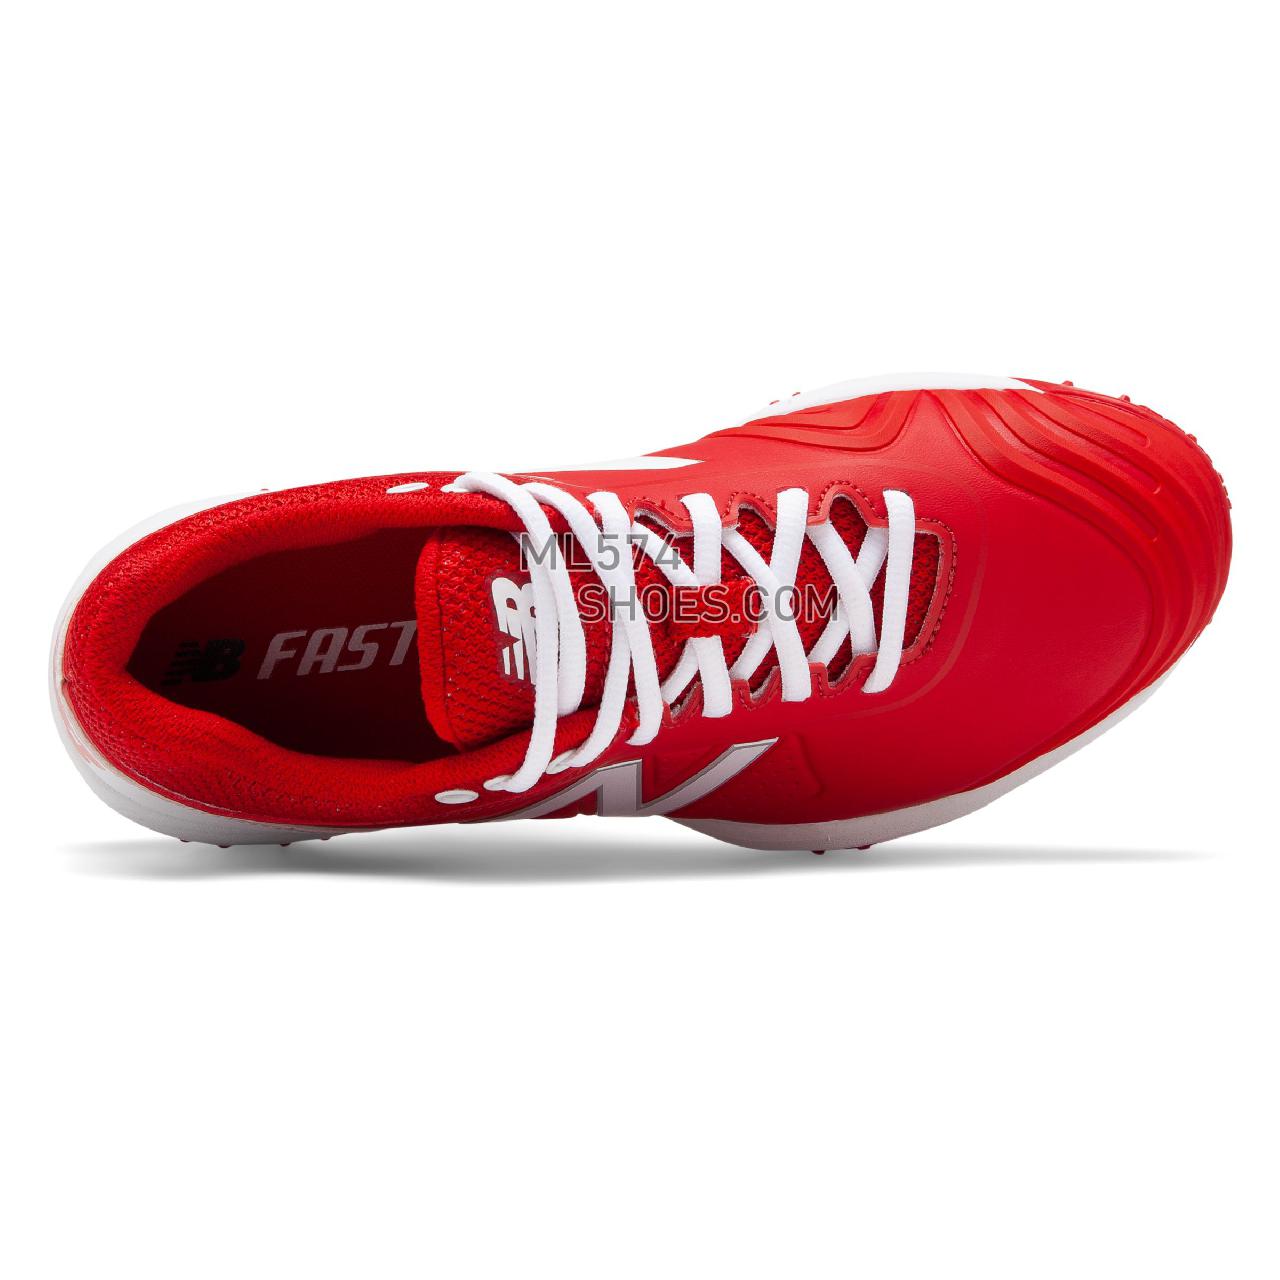 New Balance Fusev2 Turf - Women's Softball - Red with White - STFUSER2